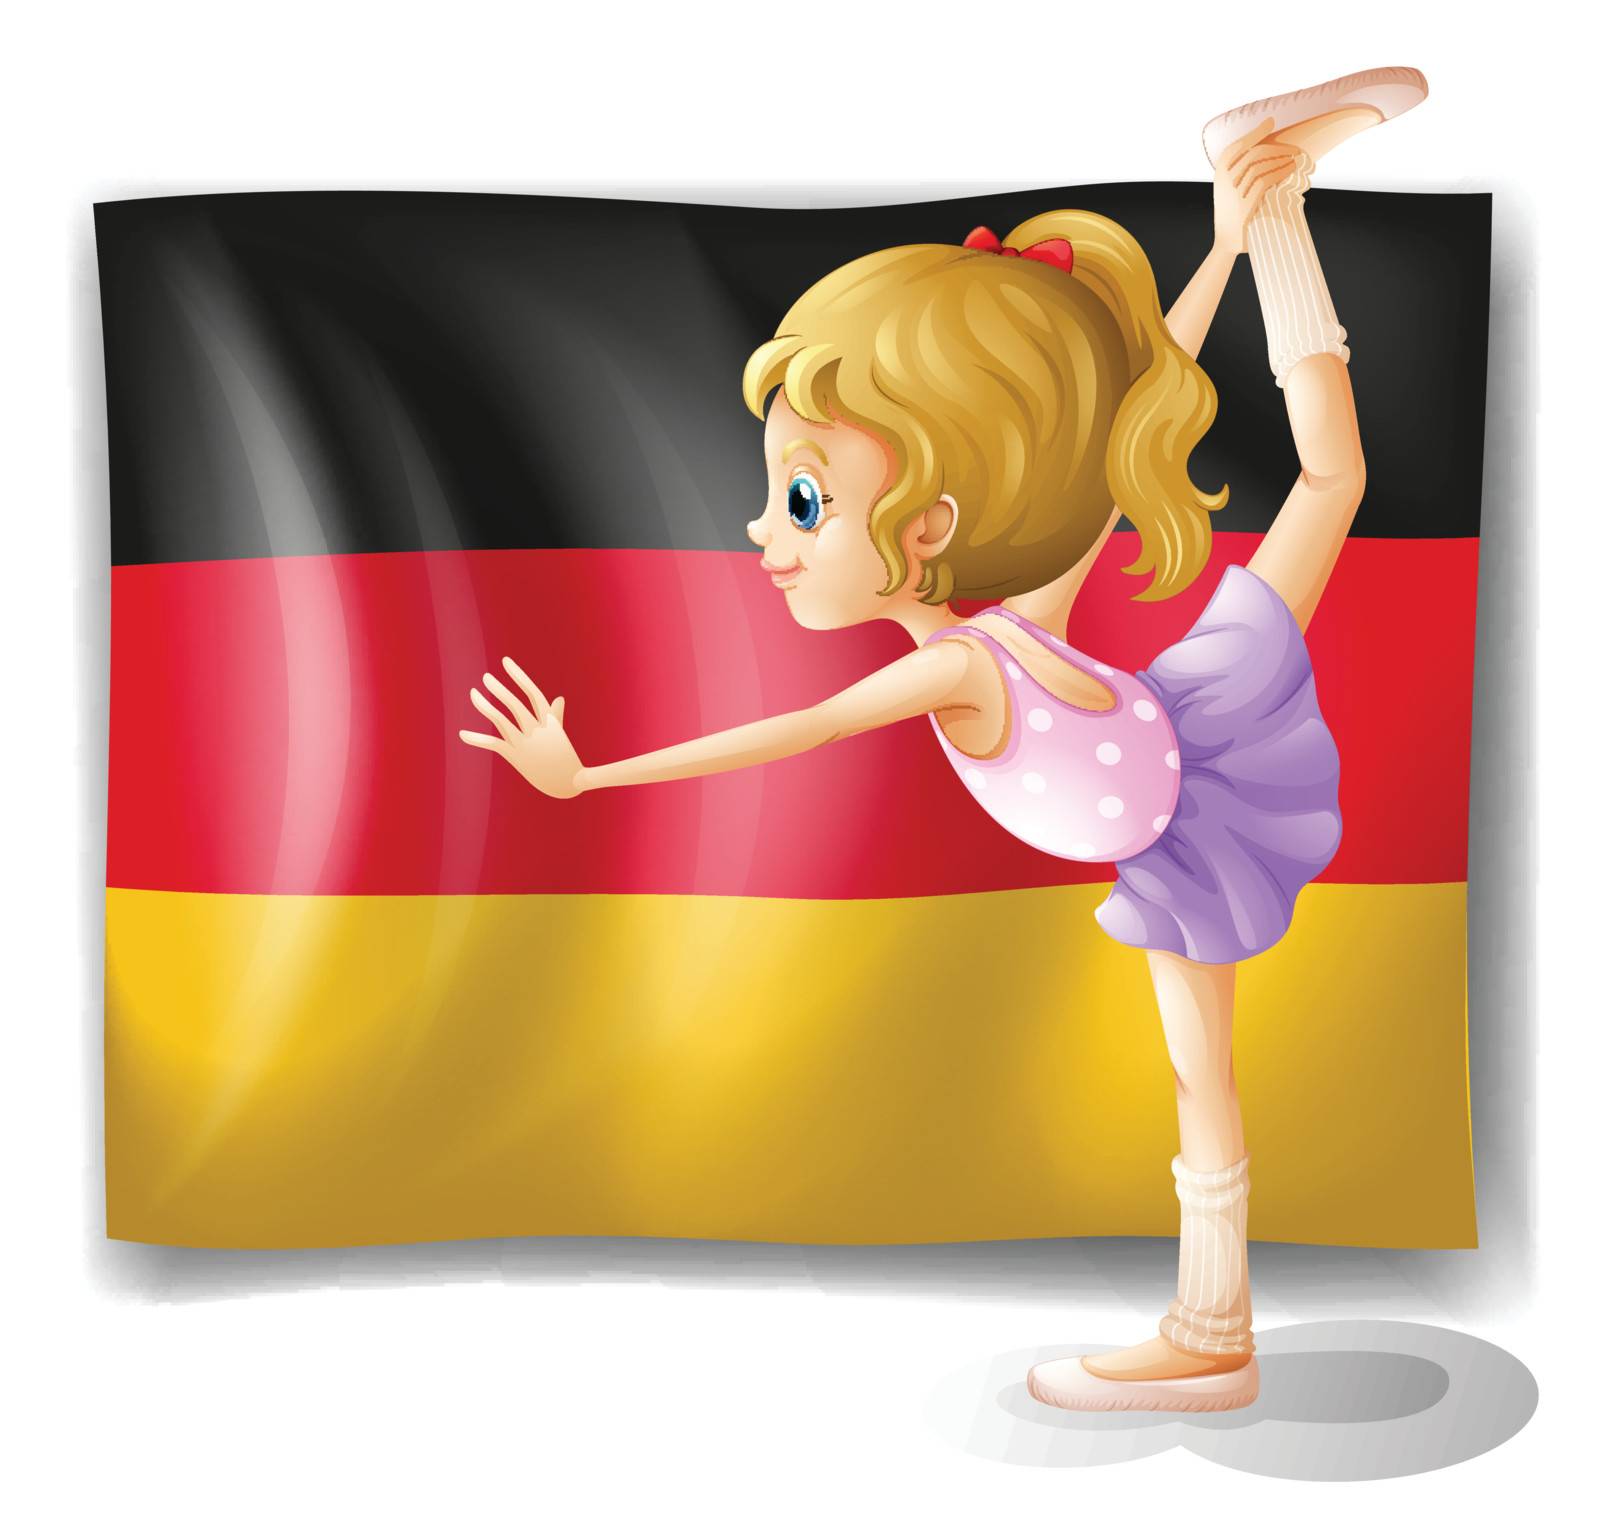 Illustration of a ballet dancer in front of the flag of Germany on a white background